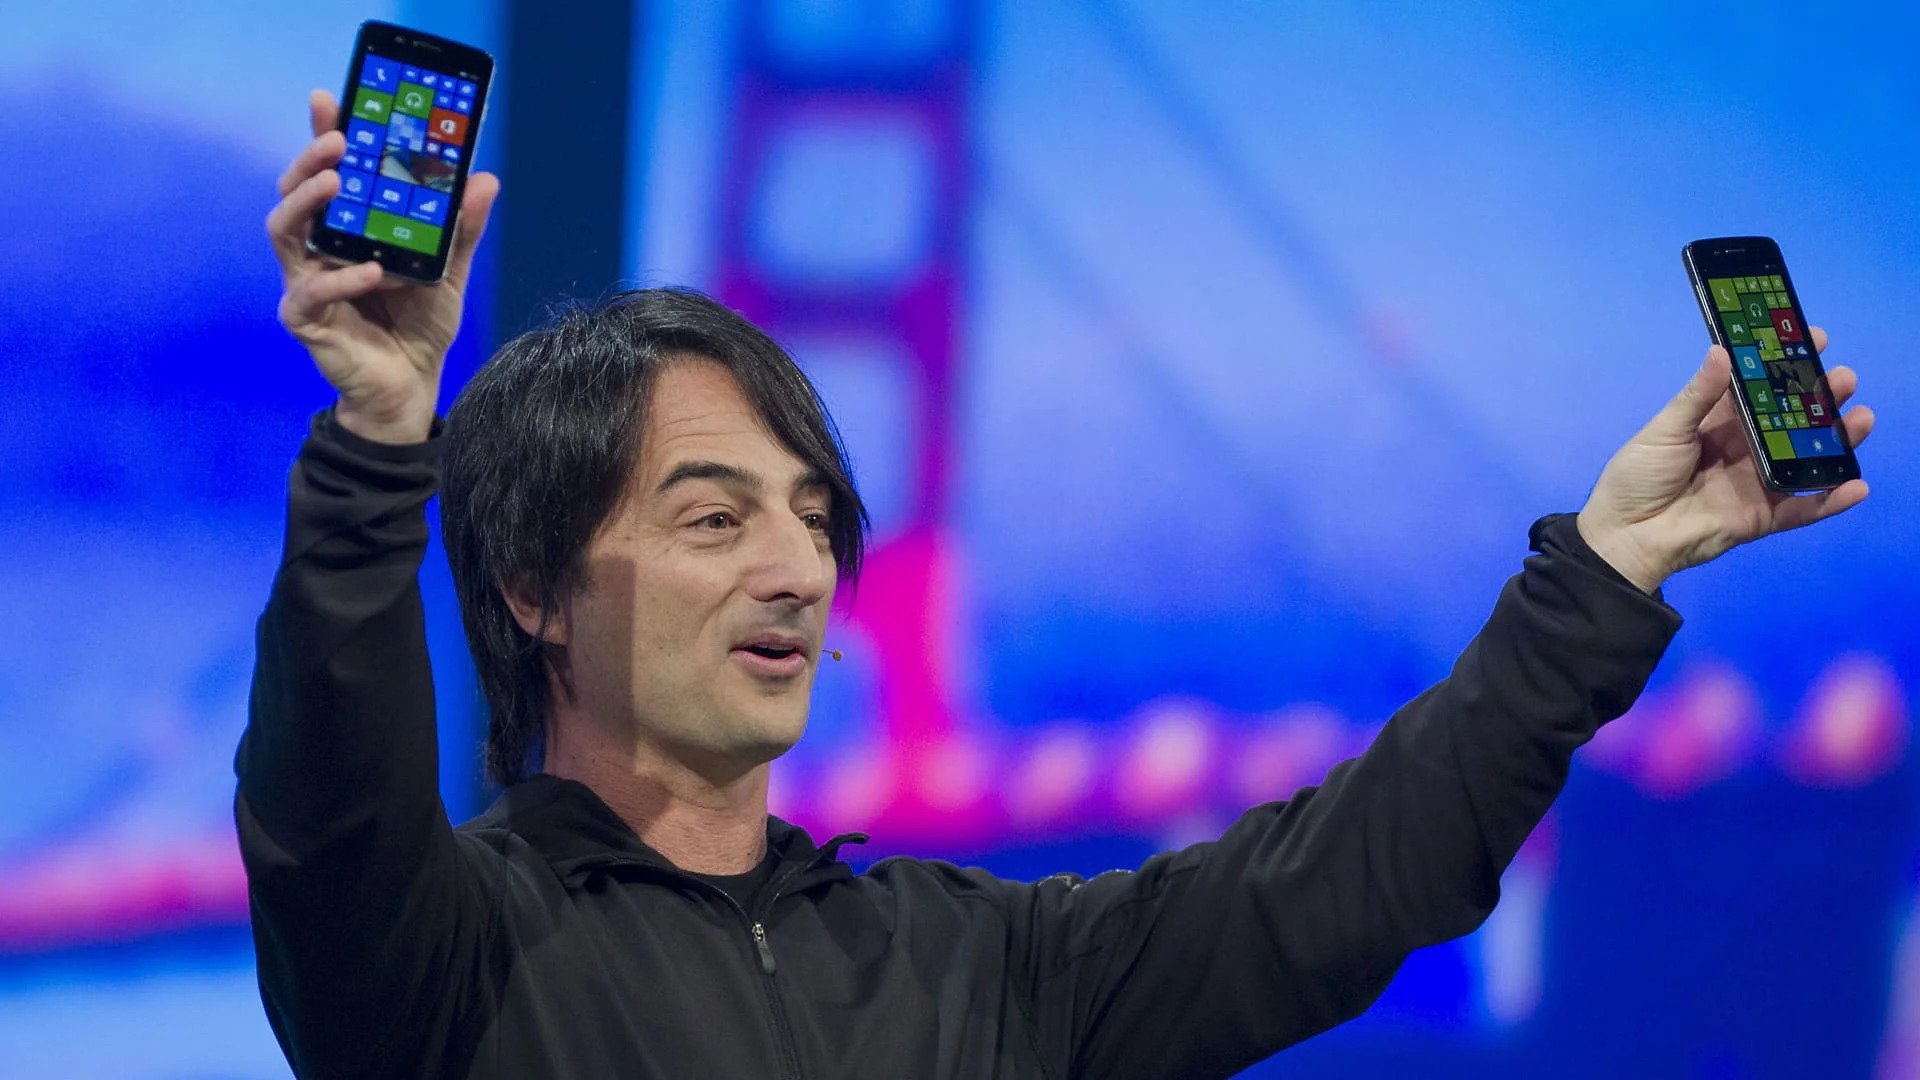 the presentation for the launch on the windows phone with a man holding up two smartphones